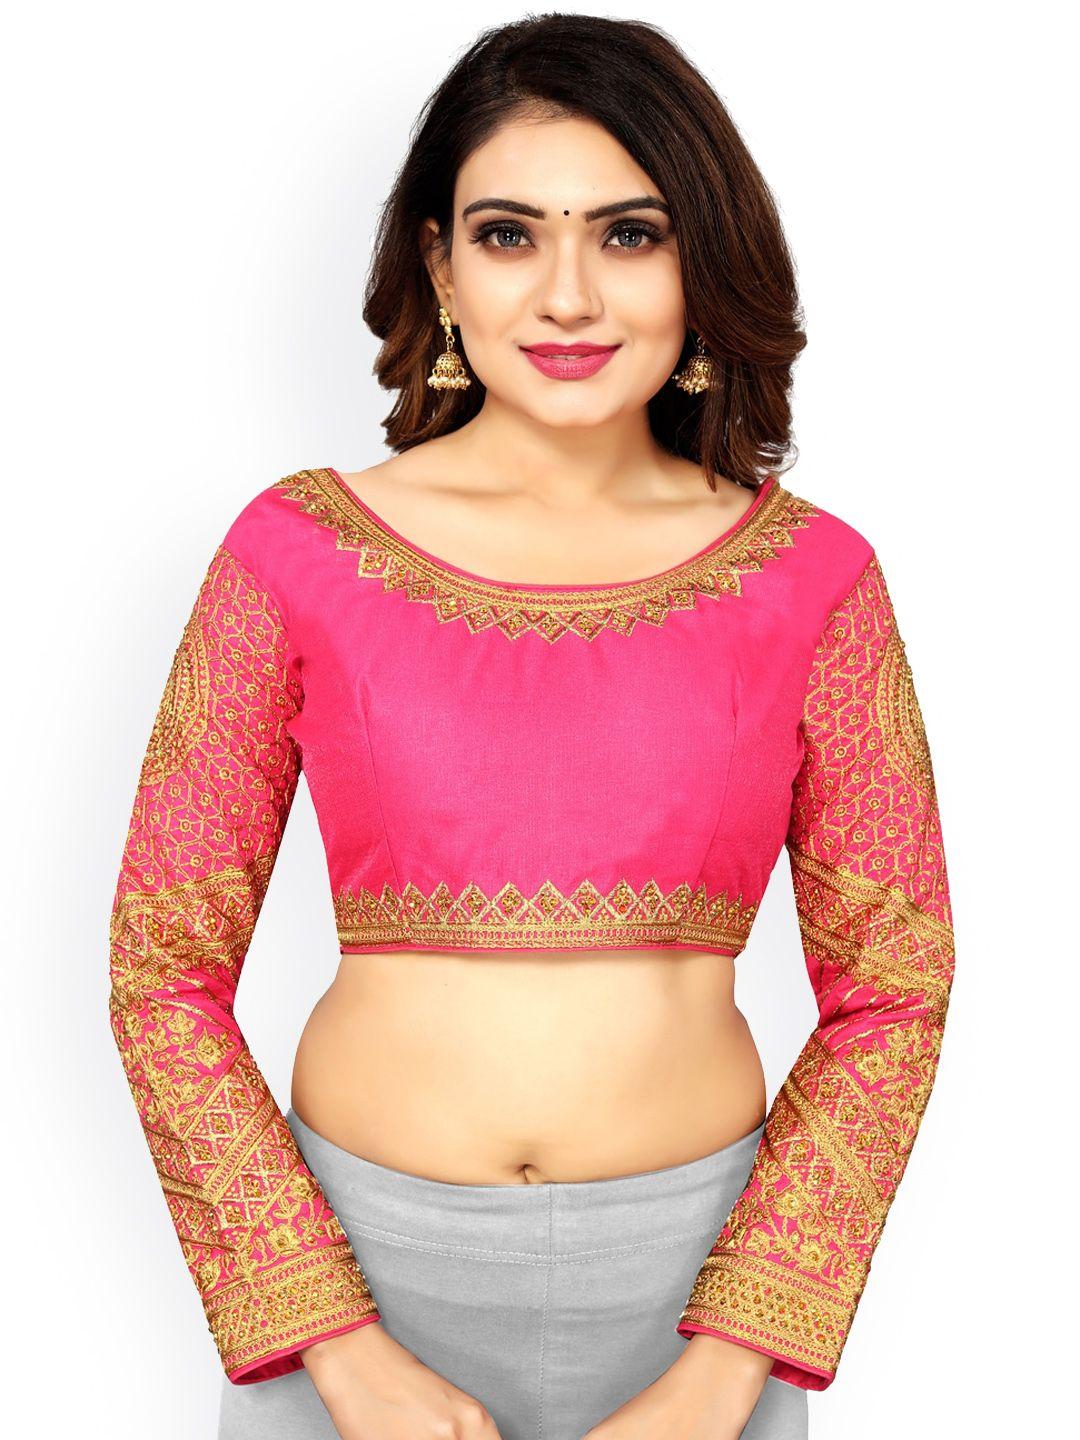 SCUBE DESIGNS Embroidered Round Neck Long Sleeve Beads & Stones Silk Saree Blouse